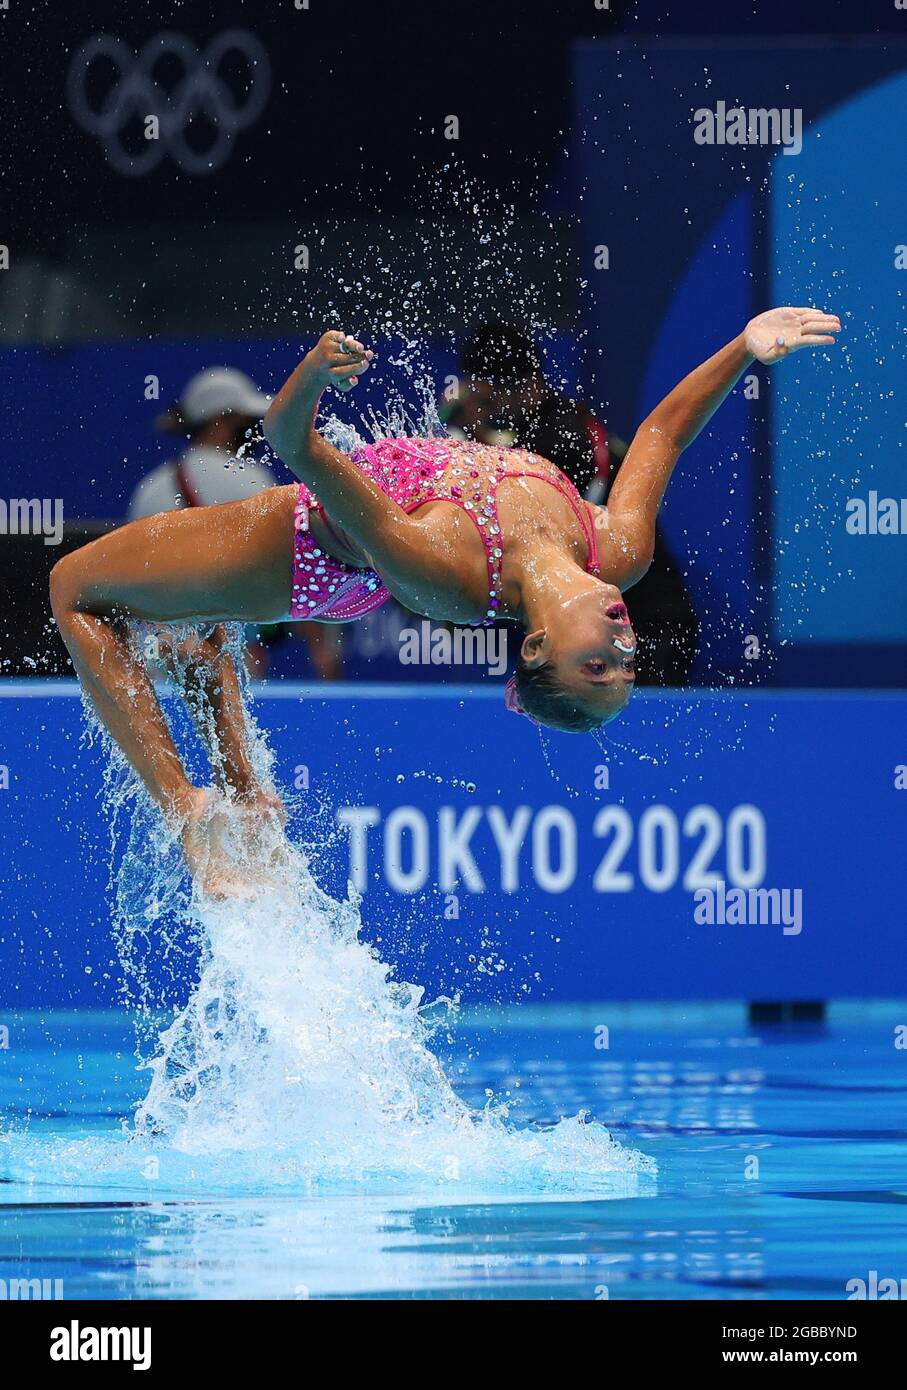 2021 olympics artistic swimming What is